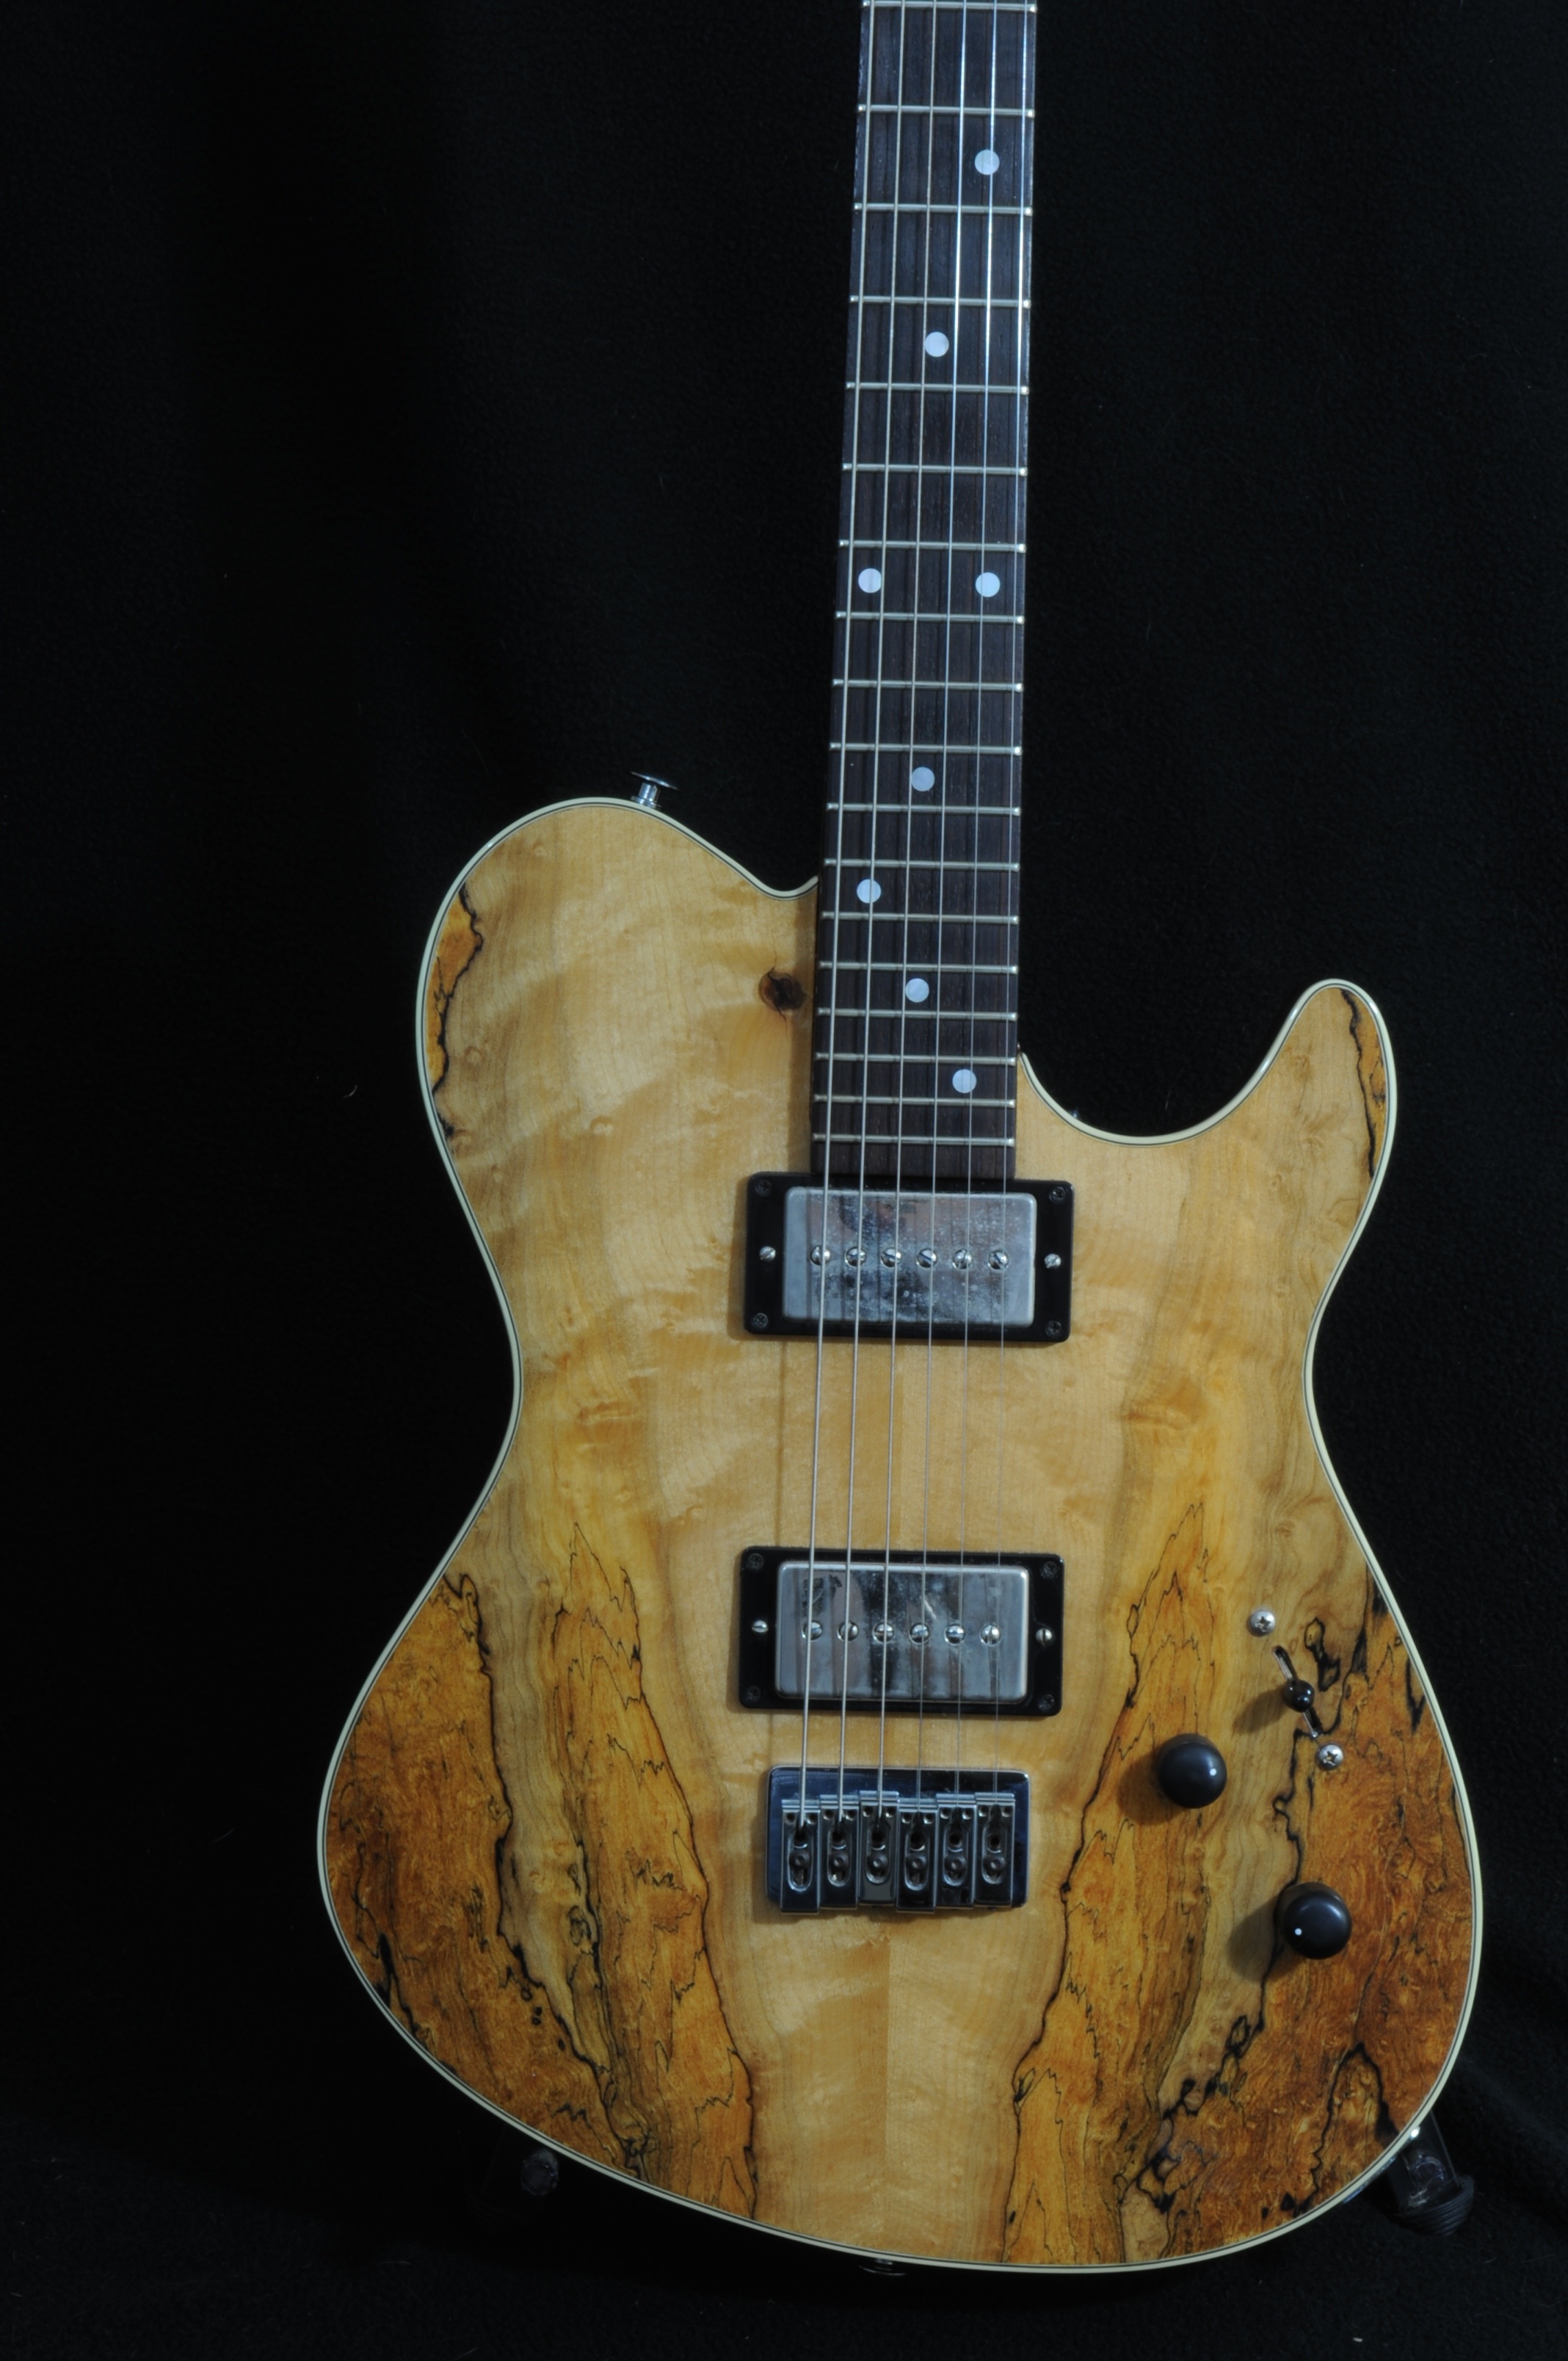 2011 Lipe Twisted Soldato – Spalted Maple